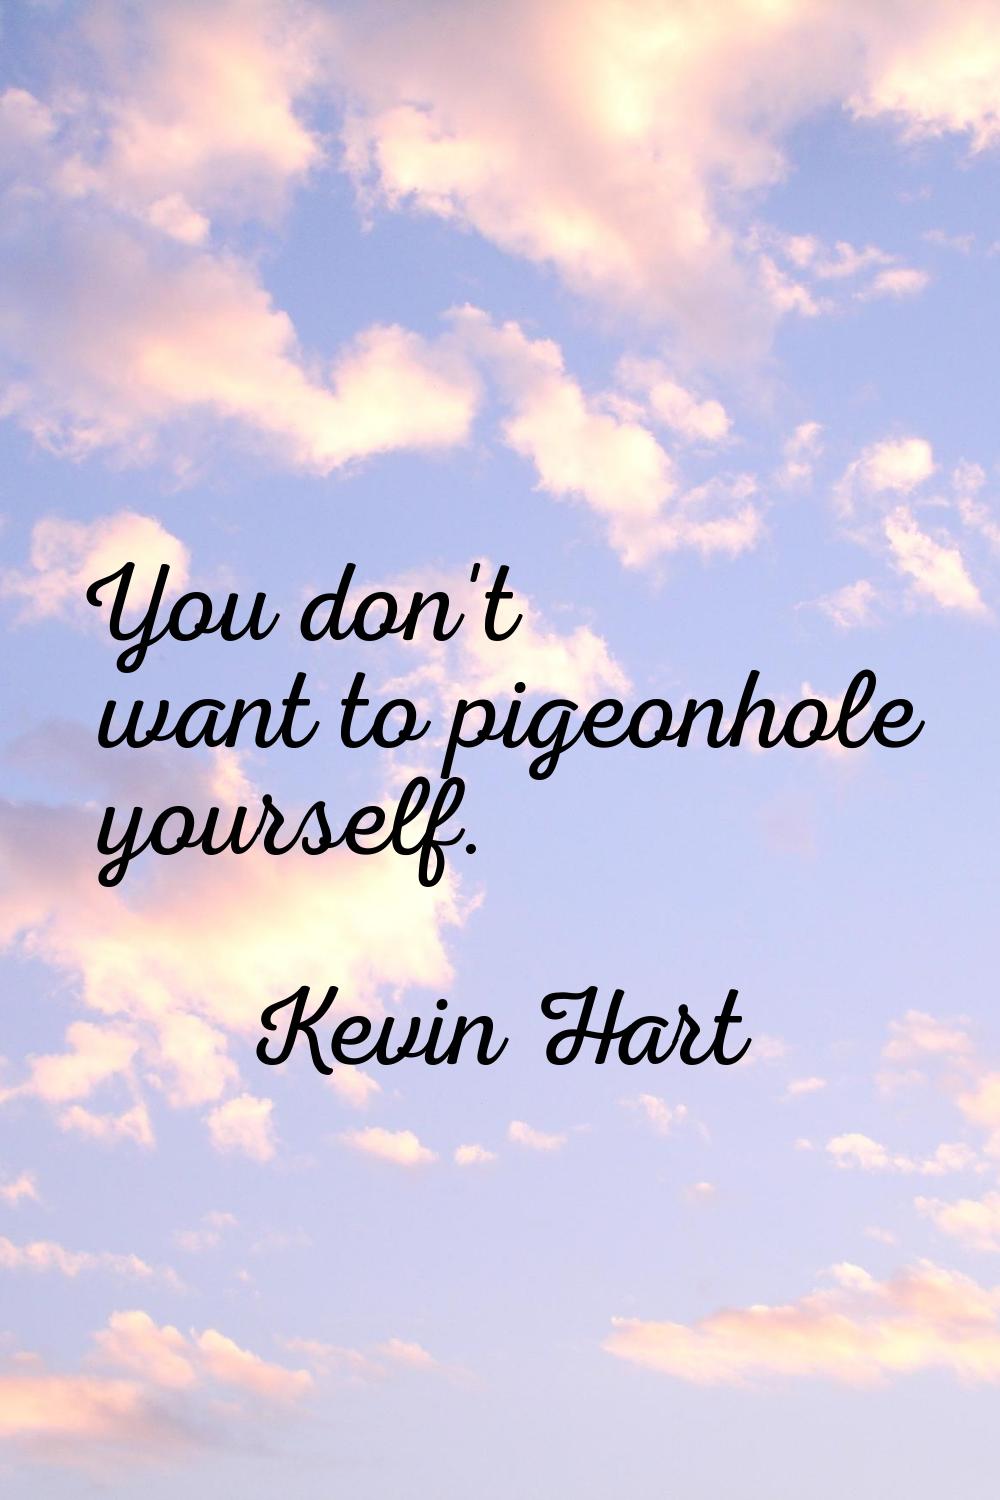 You don't want to pigeonhole yourself.